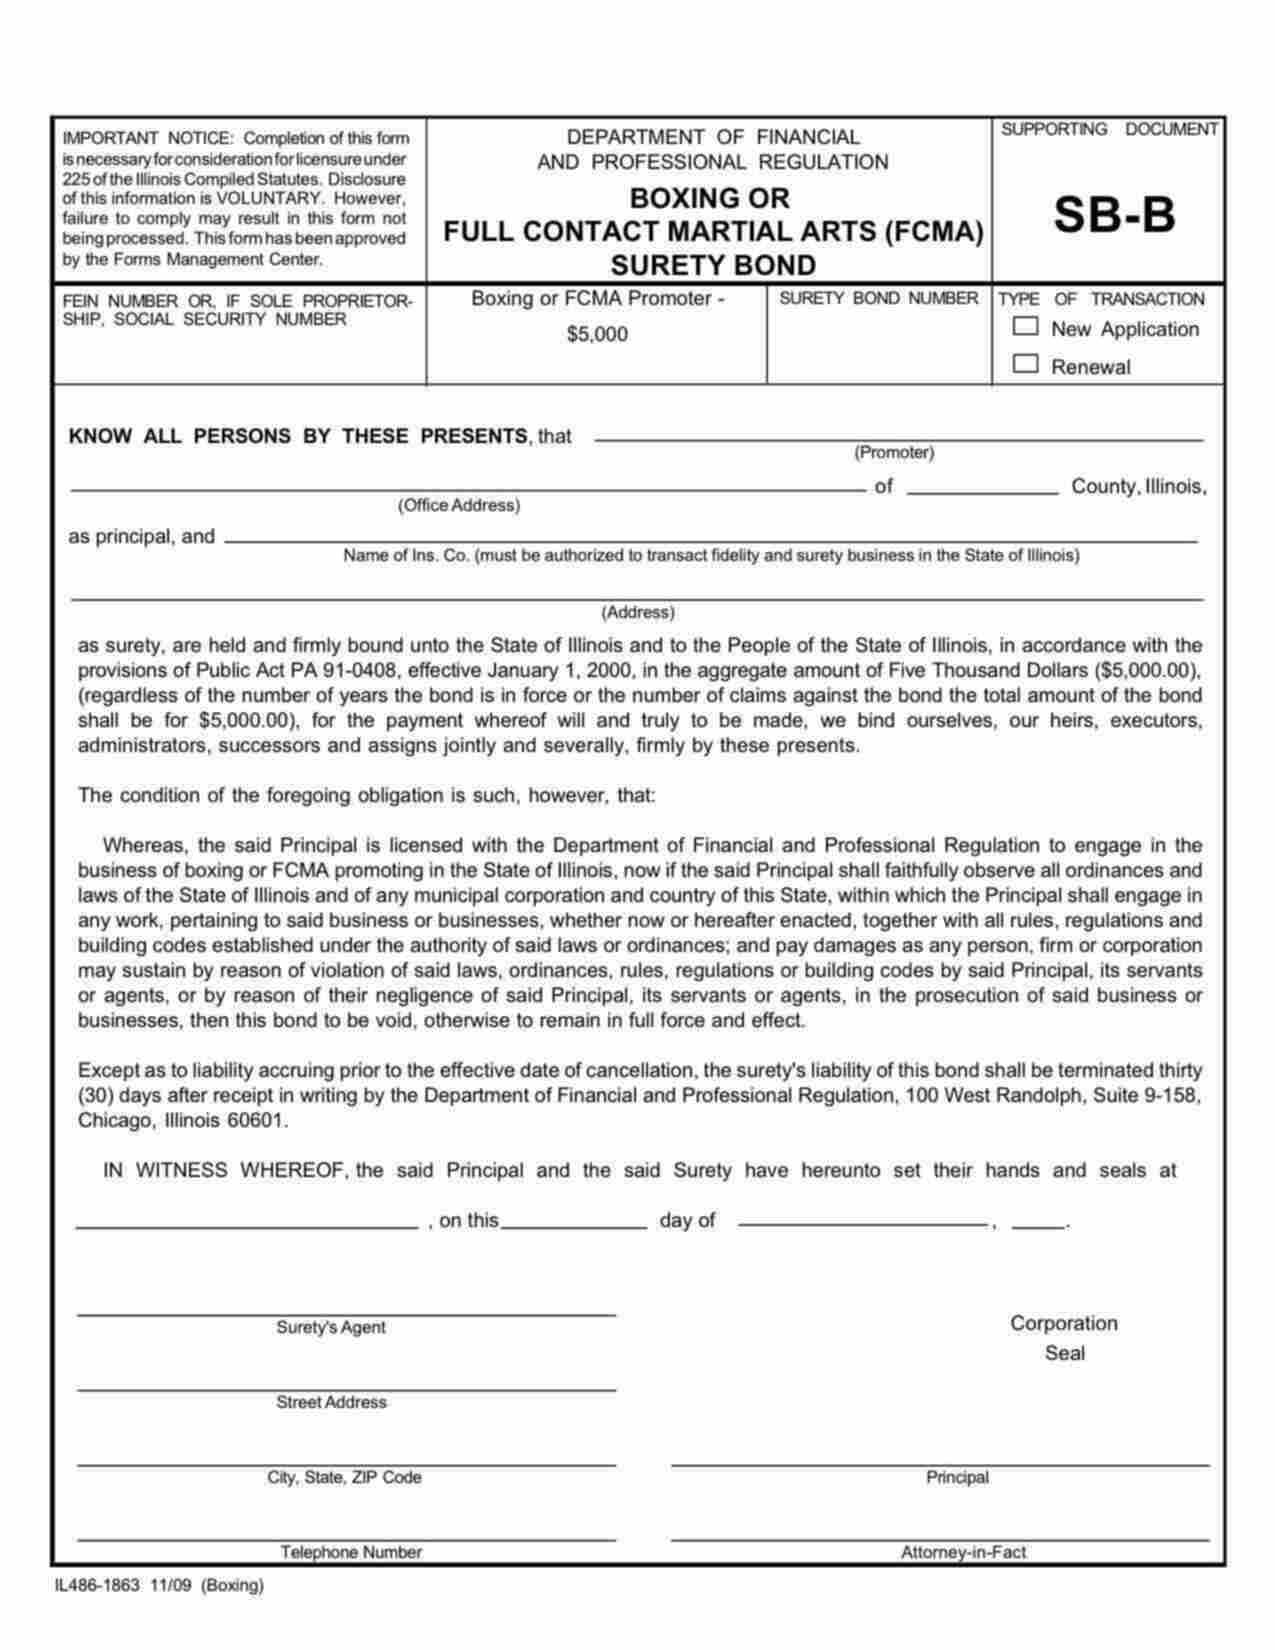 Illinois Boxing or Full Contact Martial Arts (MFCA) Bond Form